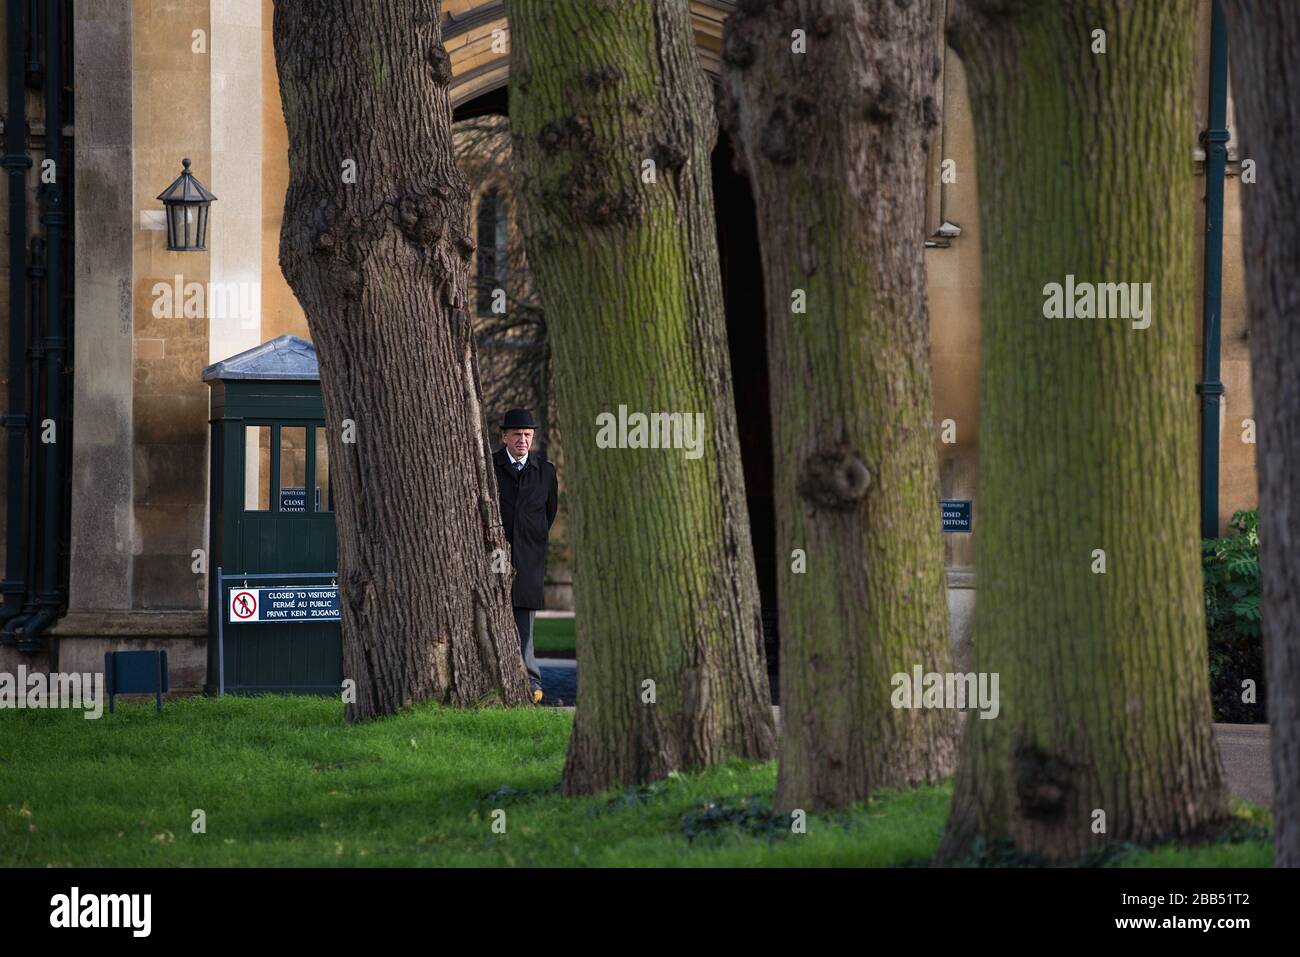 A bowler hat wearing security guard stands at an entrance to Trinity College, Cambridge, UK. Stock Photo